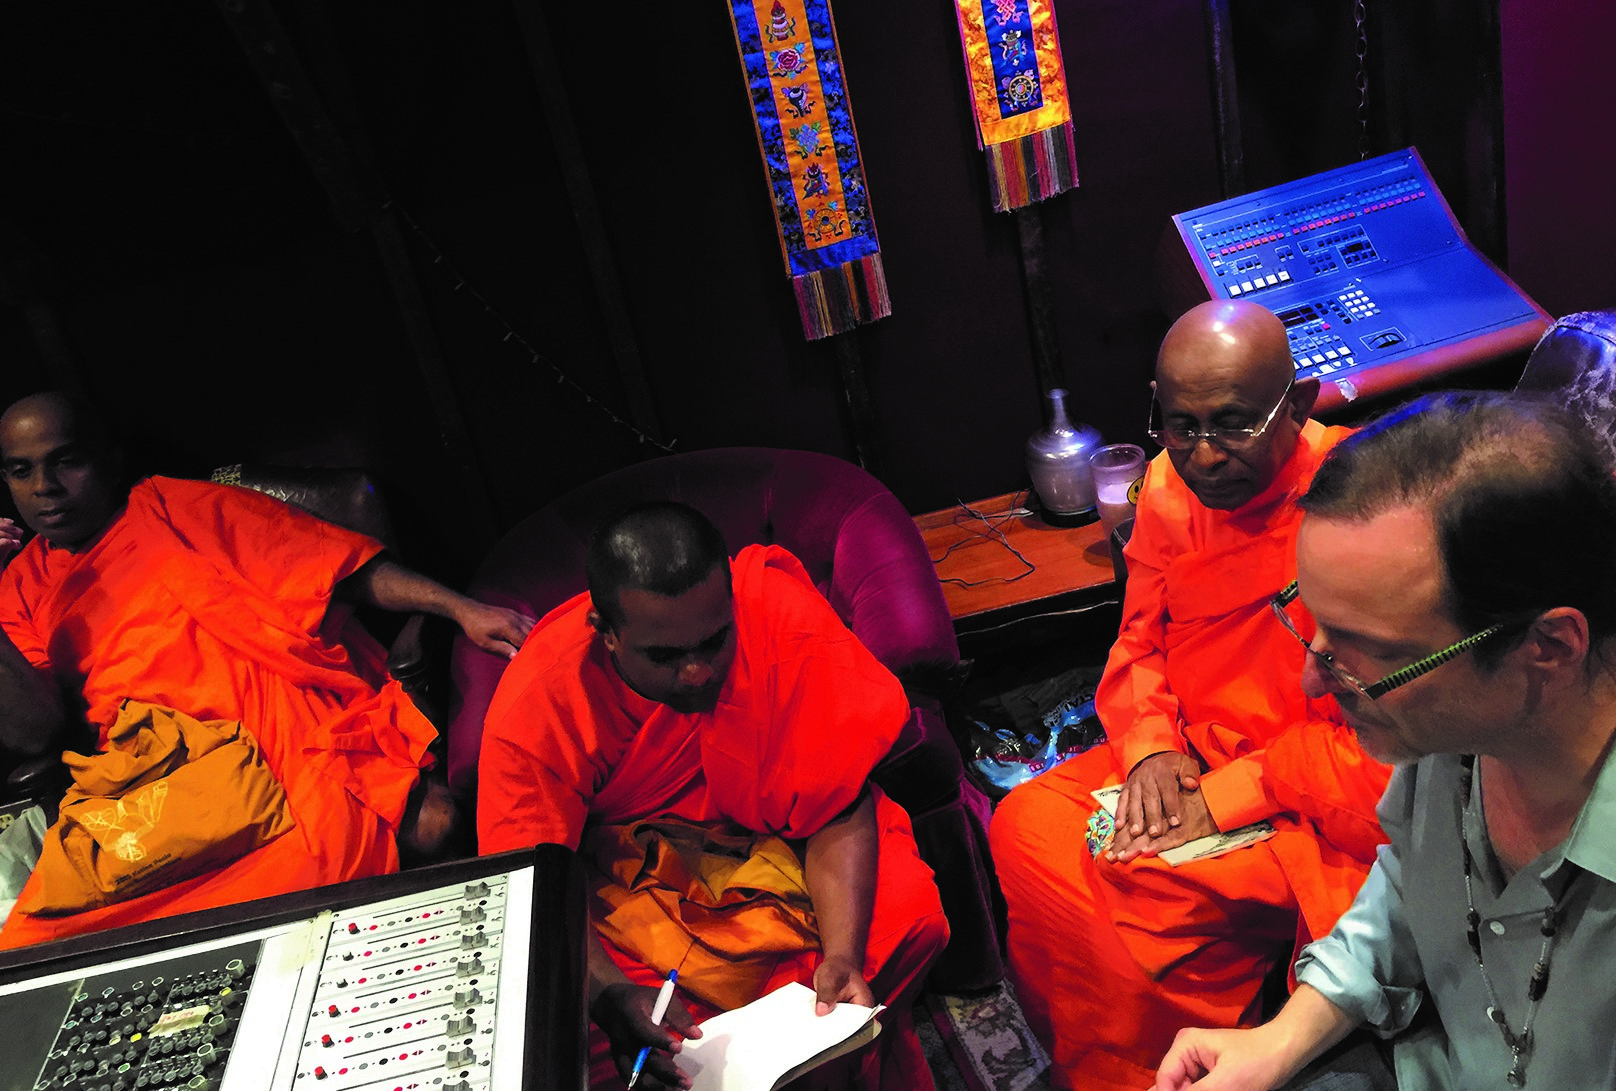 Composer Steven Chesne works with three Buddhist monks to record powerful track on Critically Acclaimed New World Music Album "Sapient: A Cantata of Peace"  Released September 4, 2018